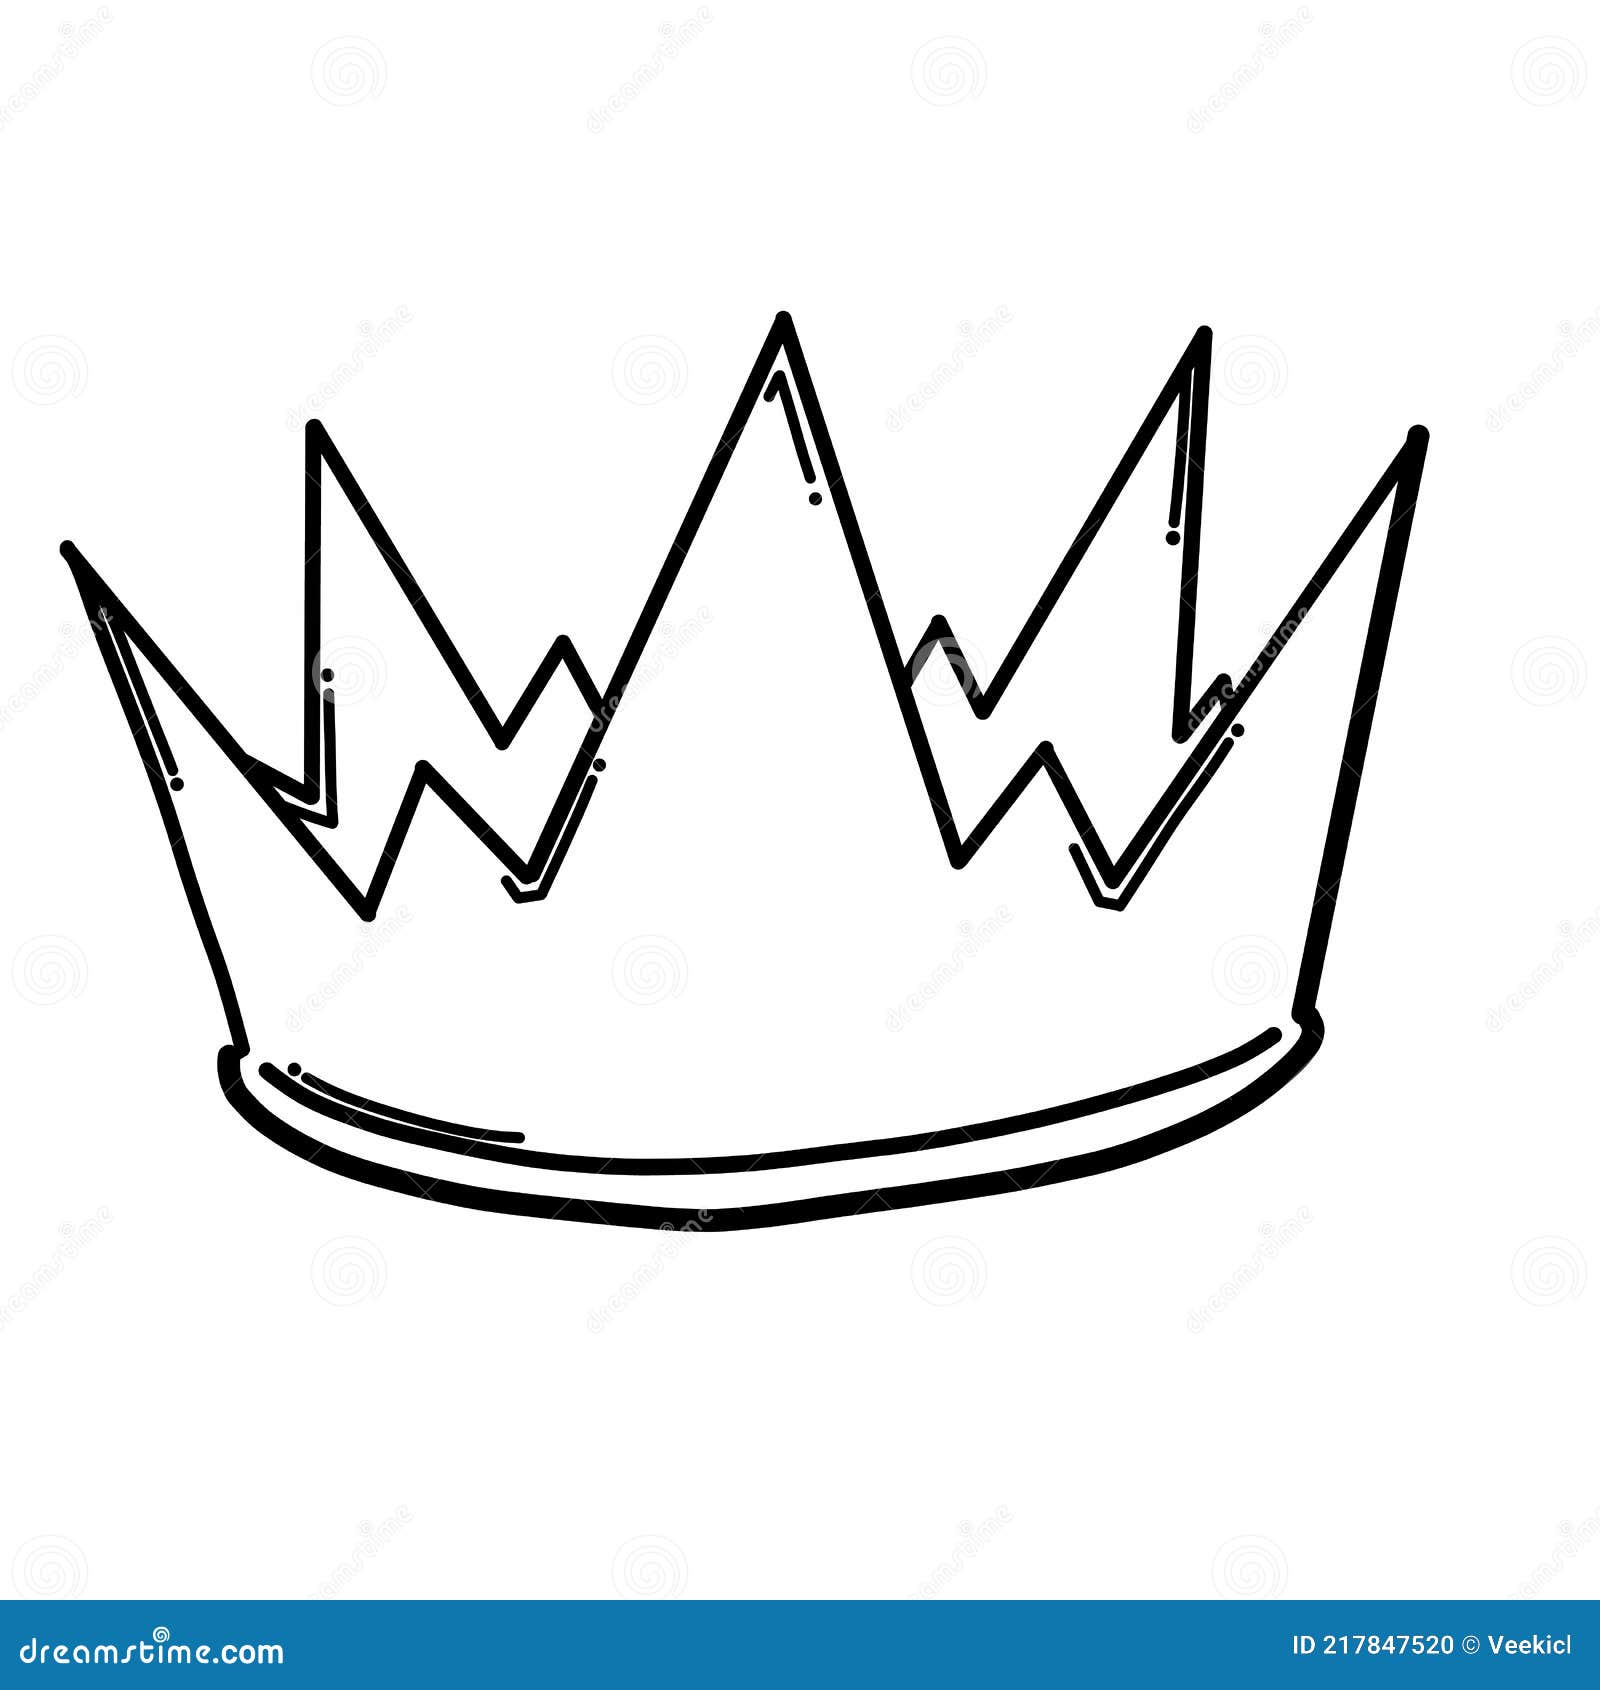 Crown Doodle Vector Icon. Drawing Sketch Illustration Hand Drawn ...